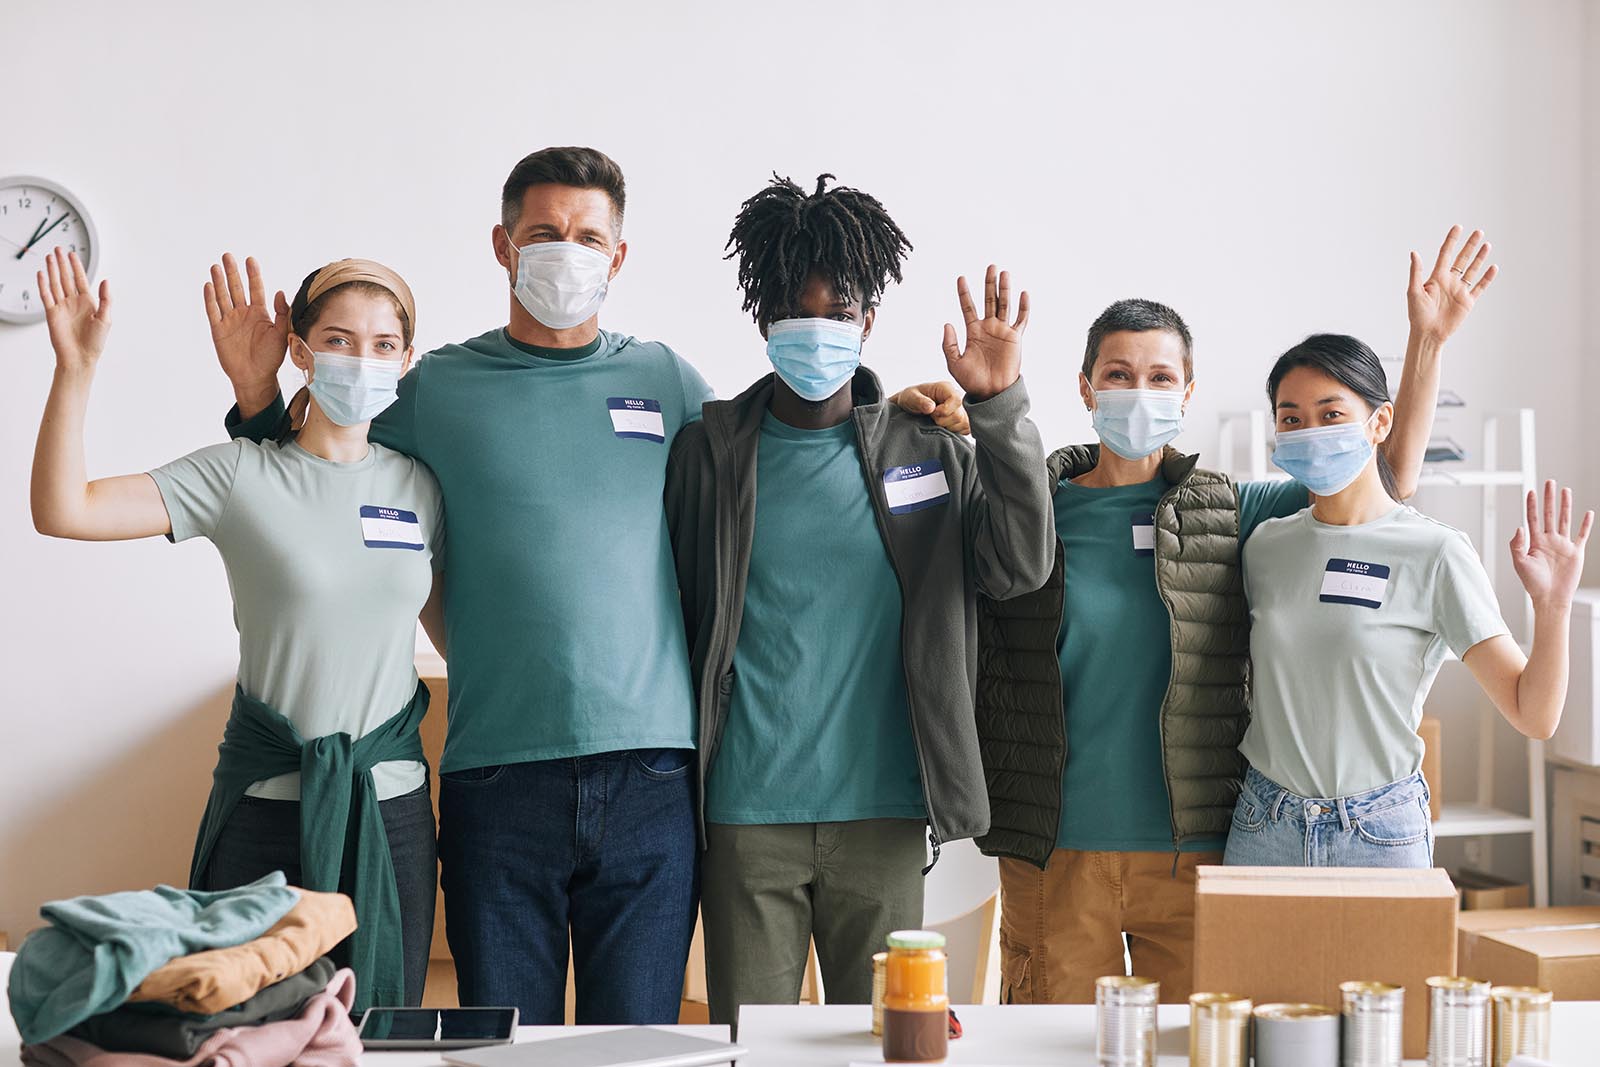 Diverse team of volunteers wearing masks and waving at camera during help and donation event, copy space